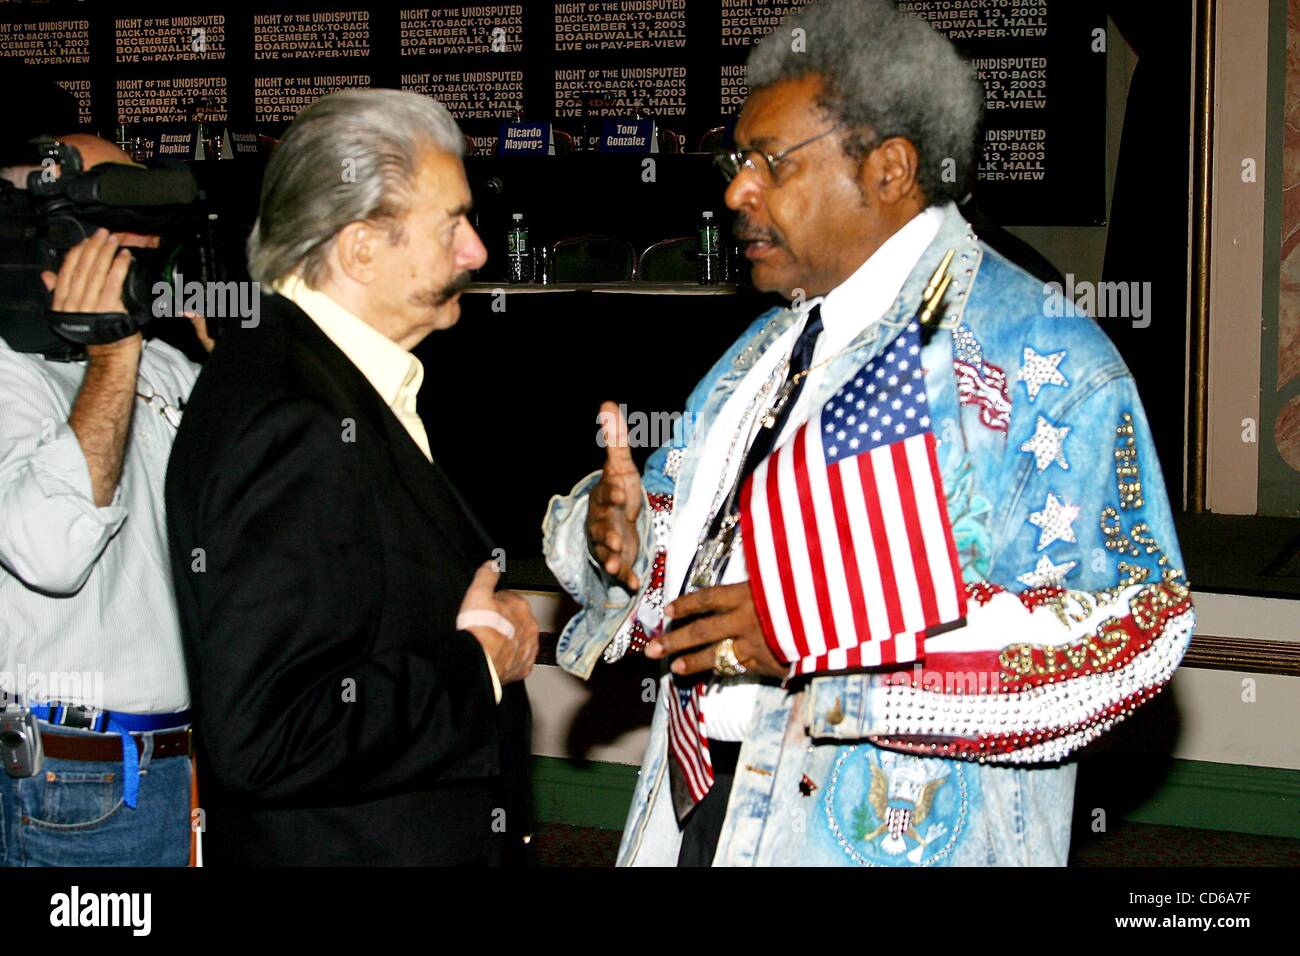 Oct. 9, 2003 - New York, New York, U.S. - K33375RM.DON KING'S PRESS CONFERENCE TO ANNOUNCE THE .LINE-UP FOR HIS UP COMING BOXING EVENT, .''BACK-TO-BACK-TO-BACK''..WHICH WILL TAKE PLACE ON DECEMBER 13, IN ATLANTIC New York, NEW JERSEY. .NEW YORK New York..   /     2003.DON KIN G AND LEROY NEIMAN(Cred Stock Photo